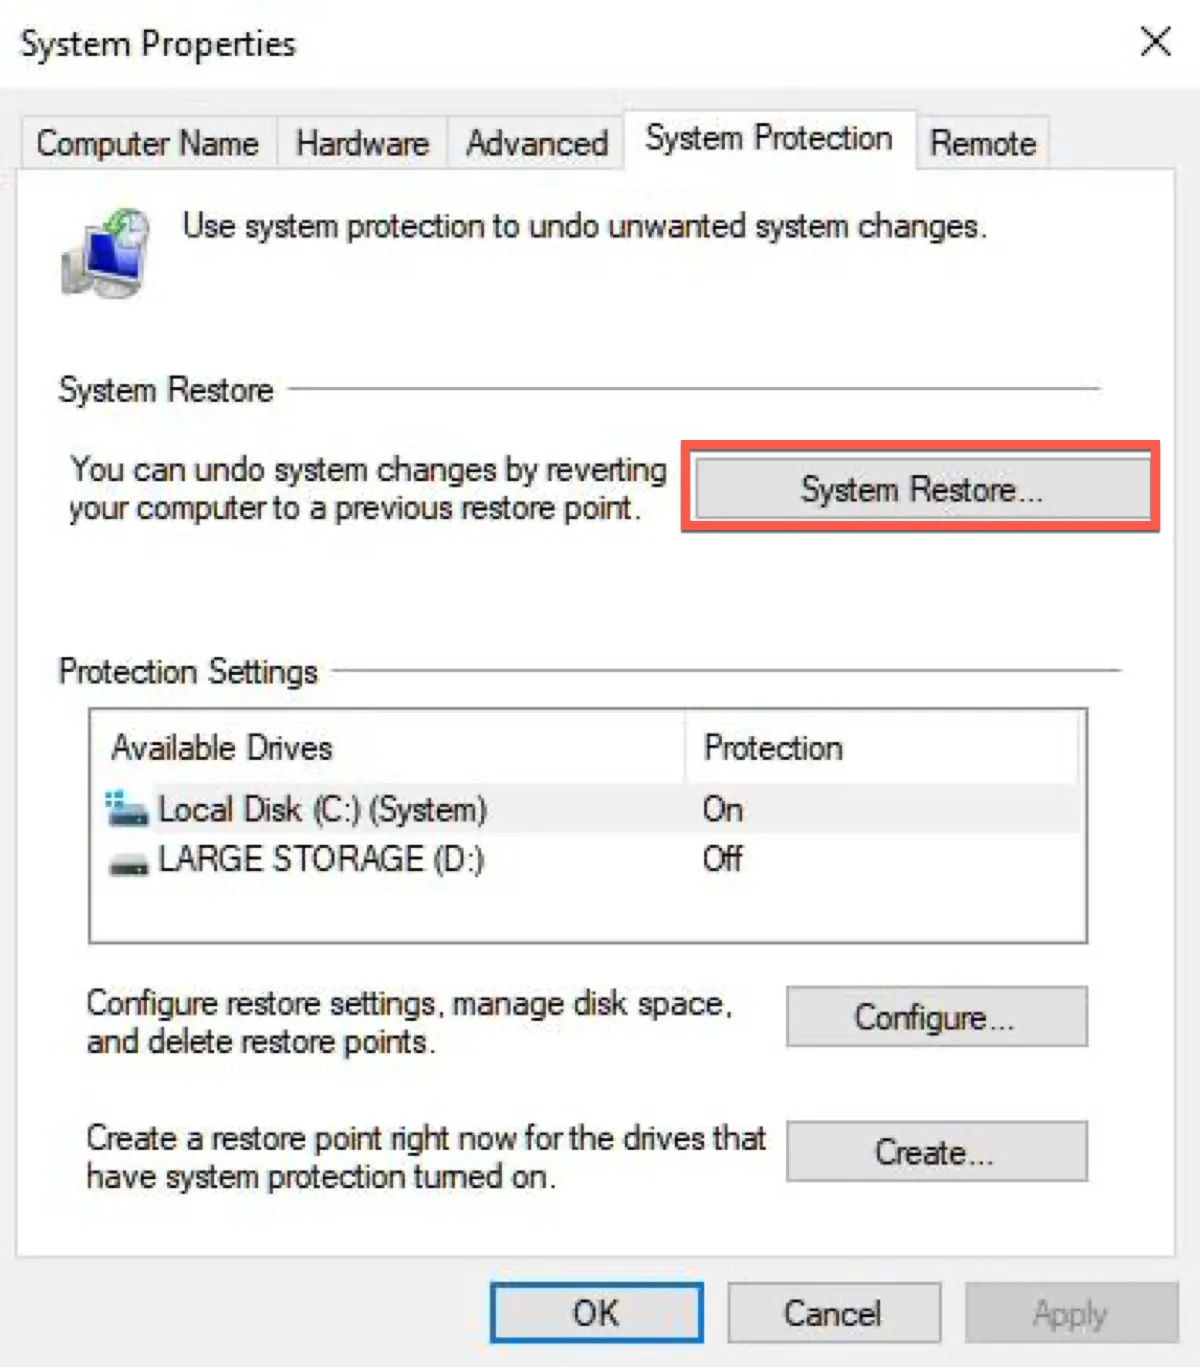 Restore from a System Restore point